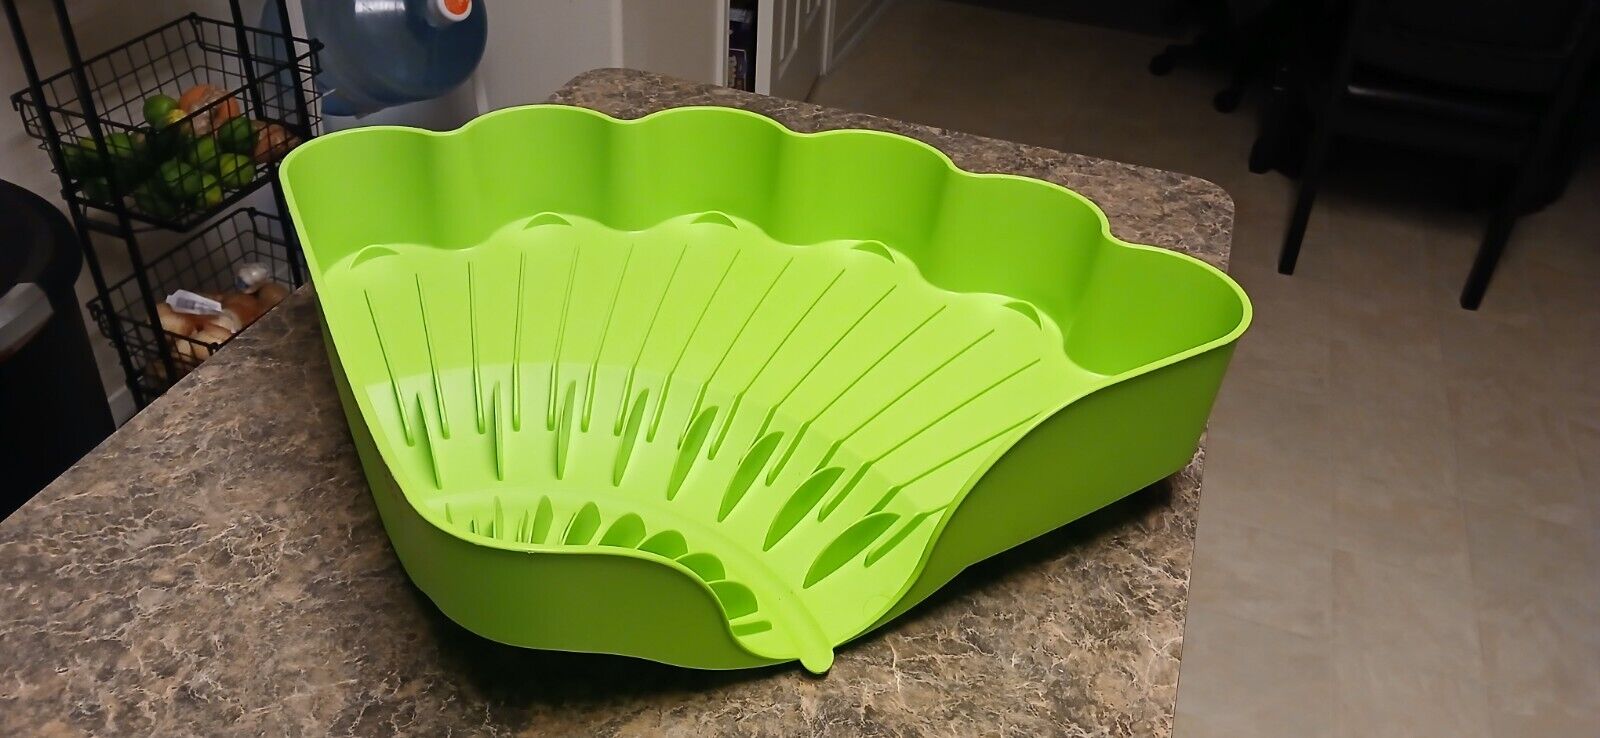 LARGE GREEN EASY DRY DISH SHELL SHAPED TUPPERWARE